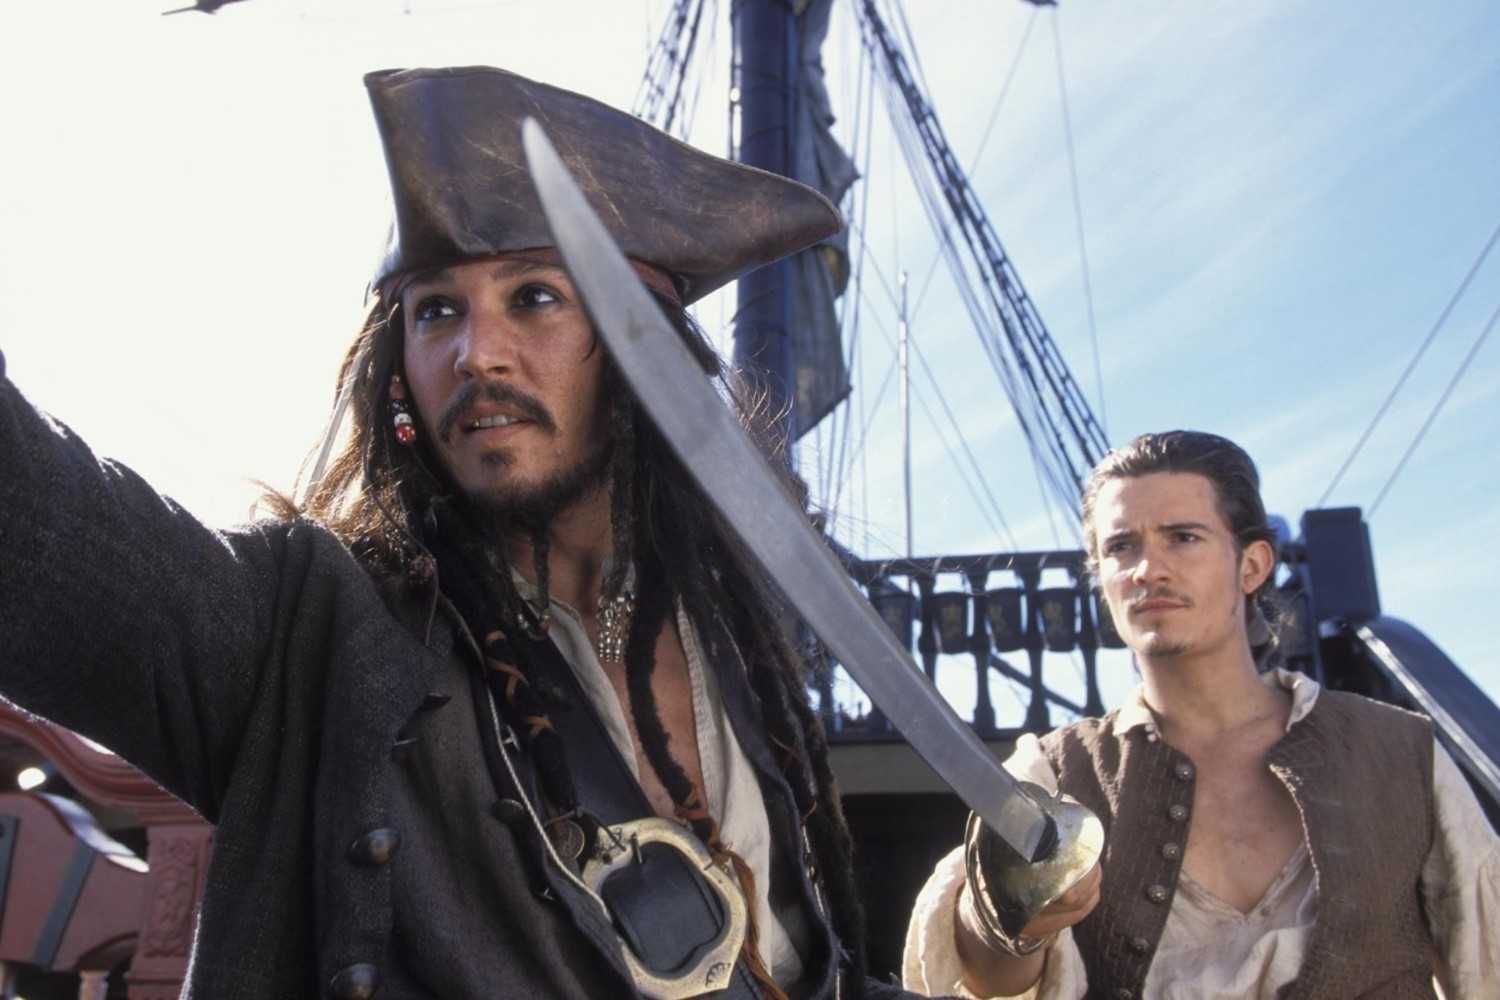 'Disney isn't enthusiastic': A shipwrecked future for the Pirates of the Caribbean franchise